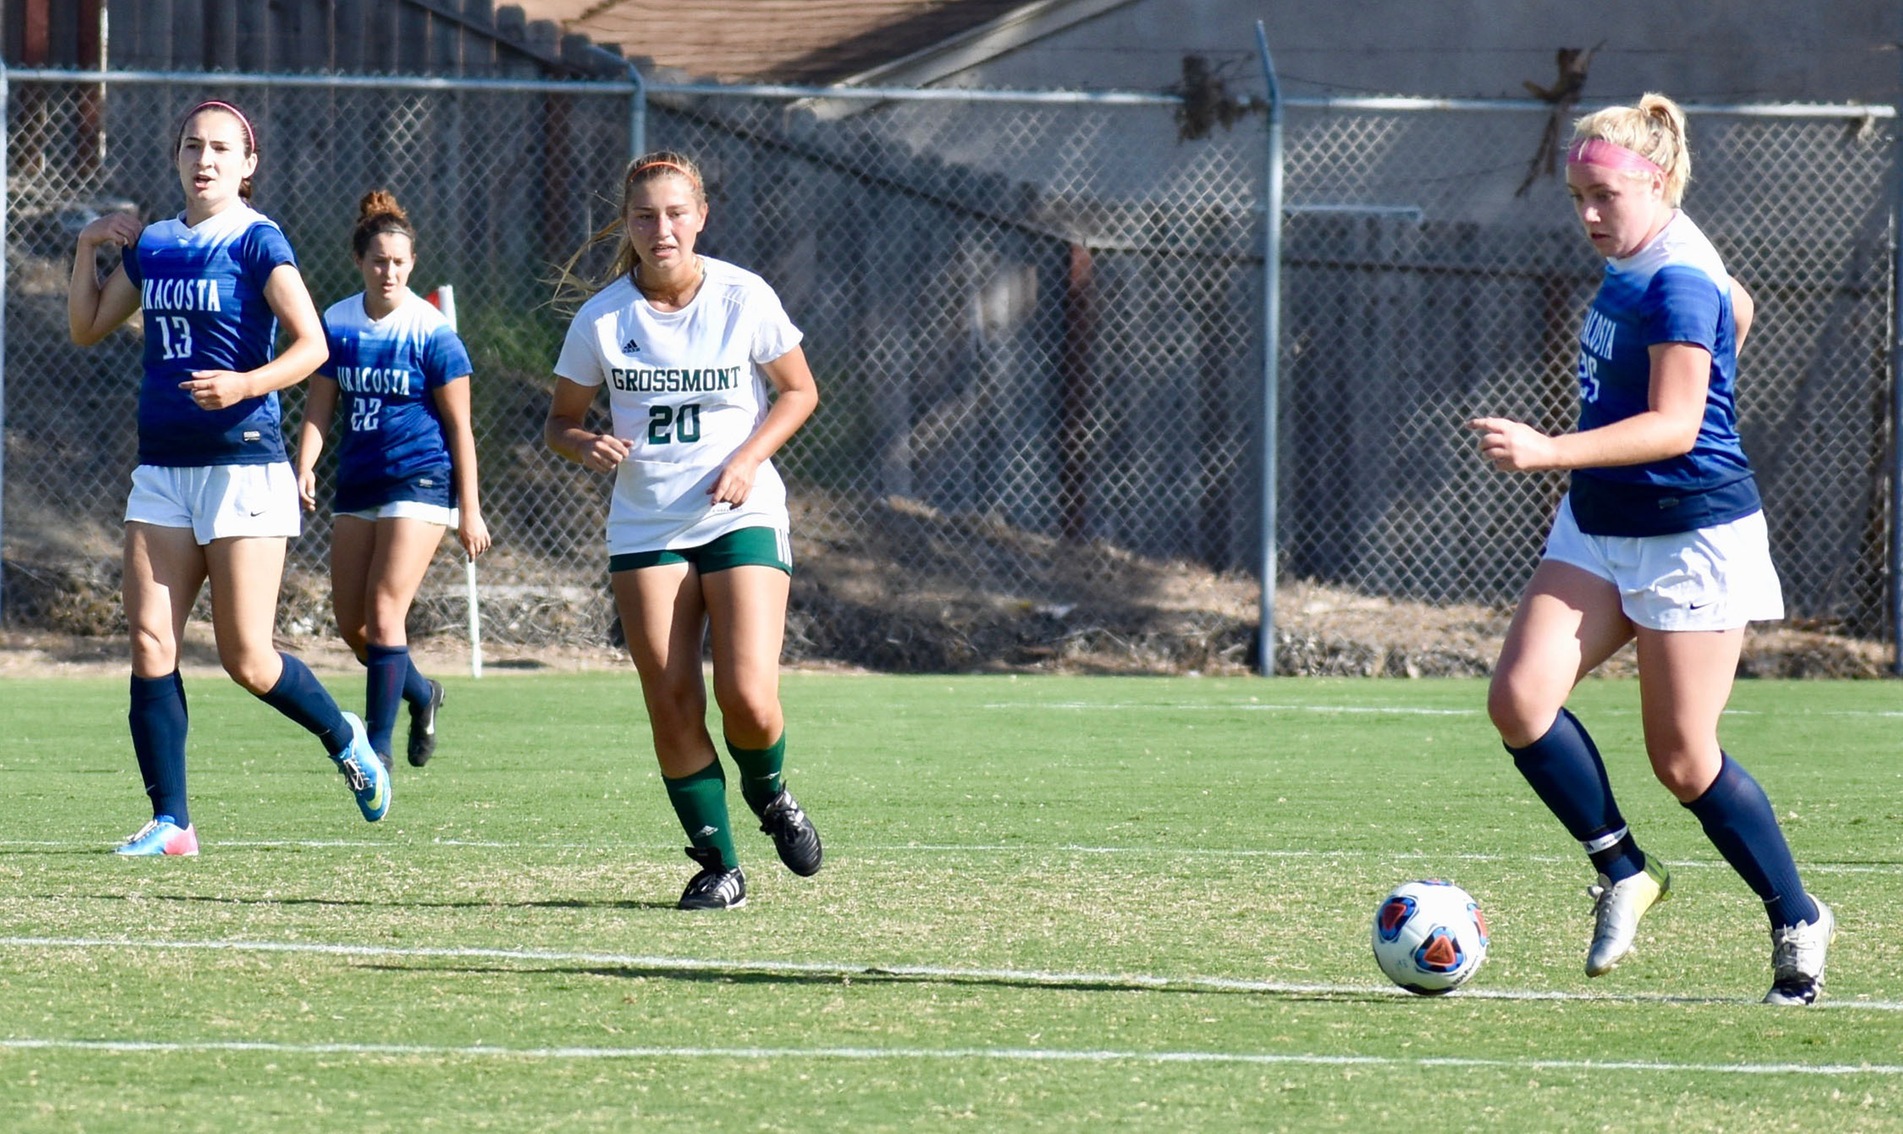 Jenna Heatherly dribbles a soccer ball in a game.